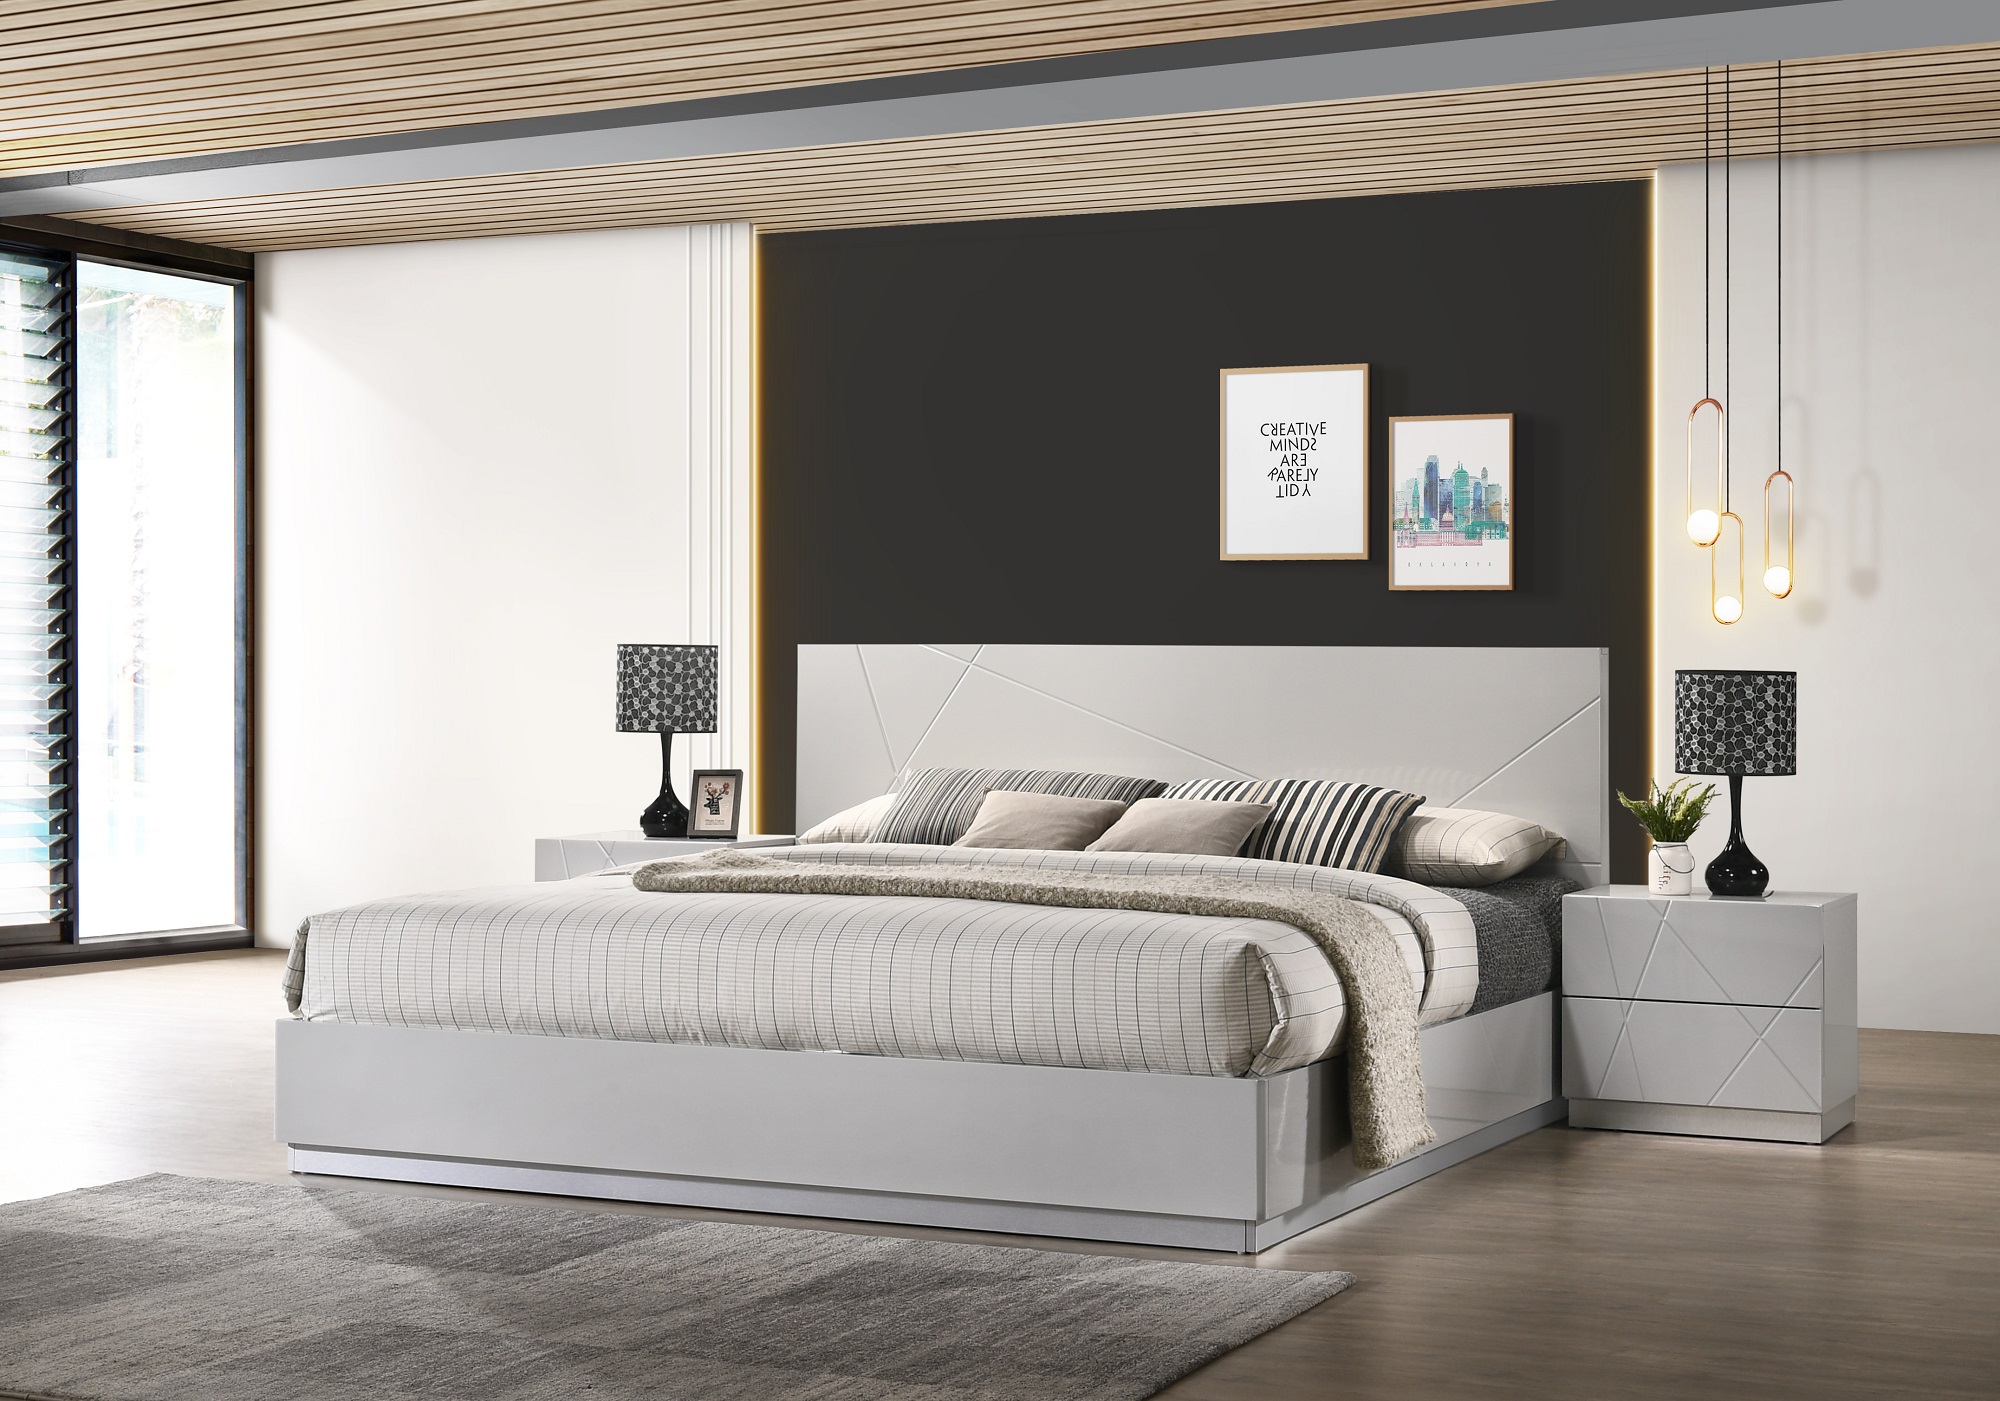 Exquisite Quality Contemporary Bedroom Sets